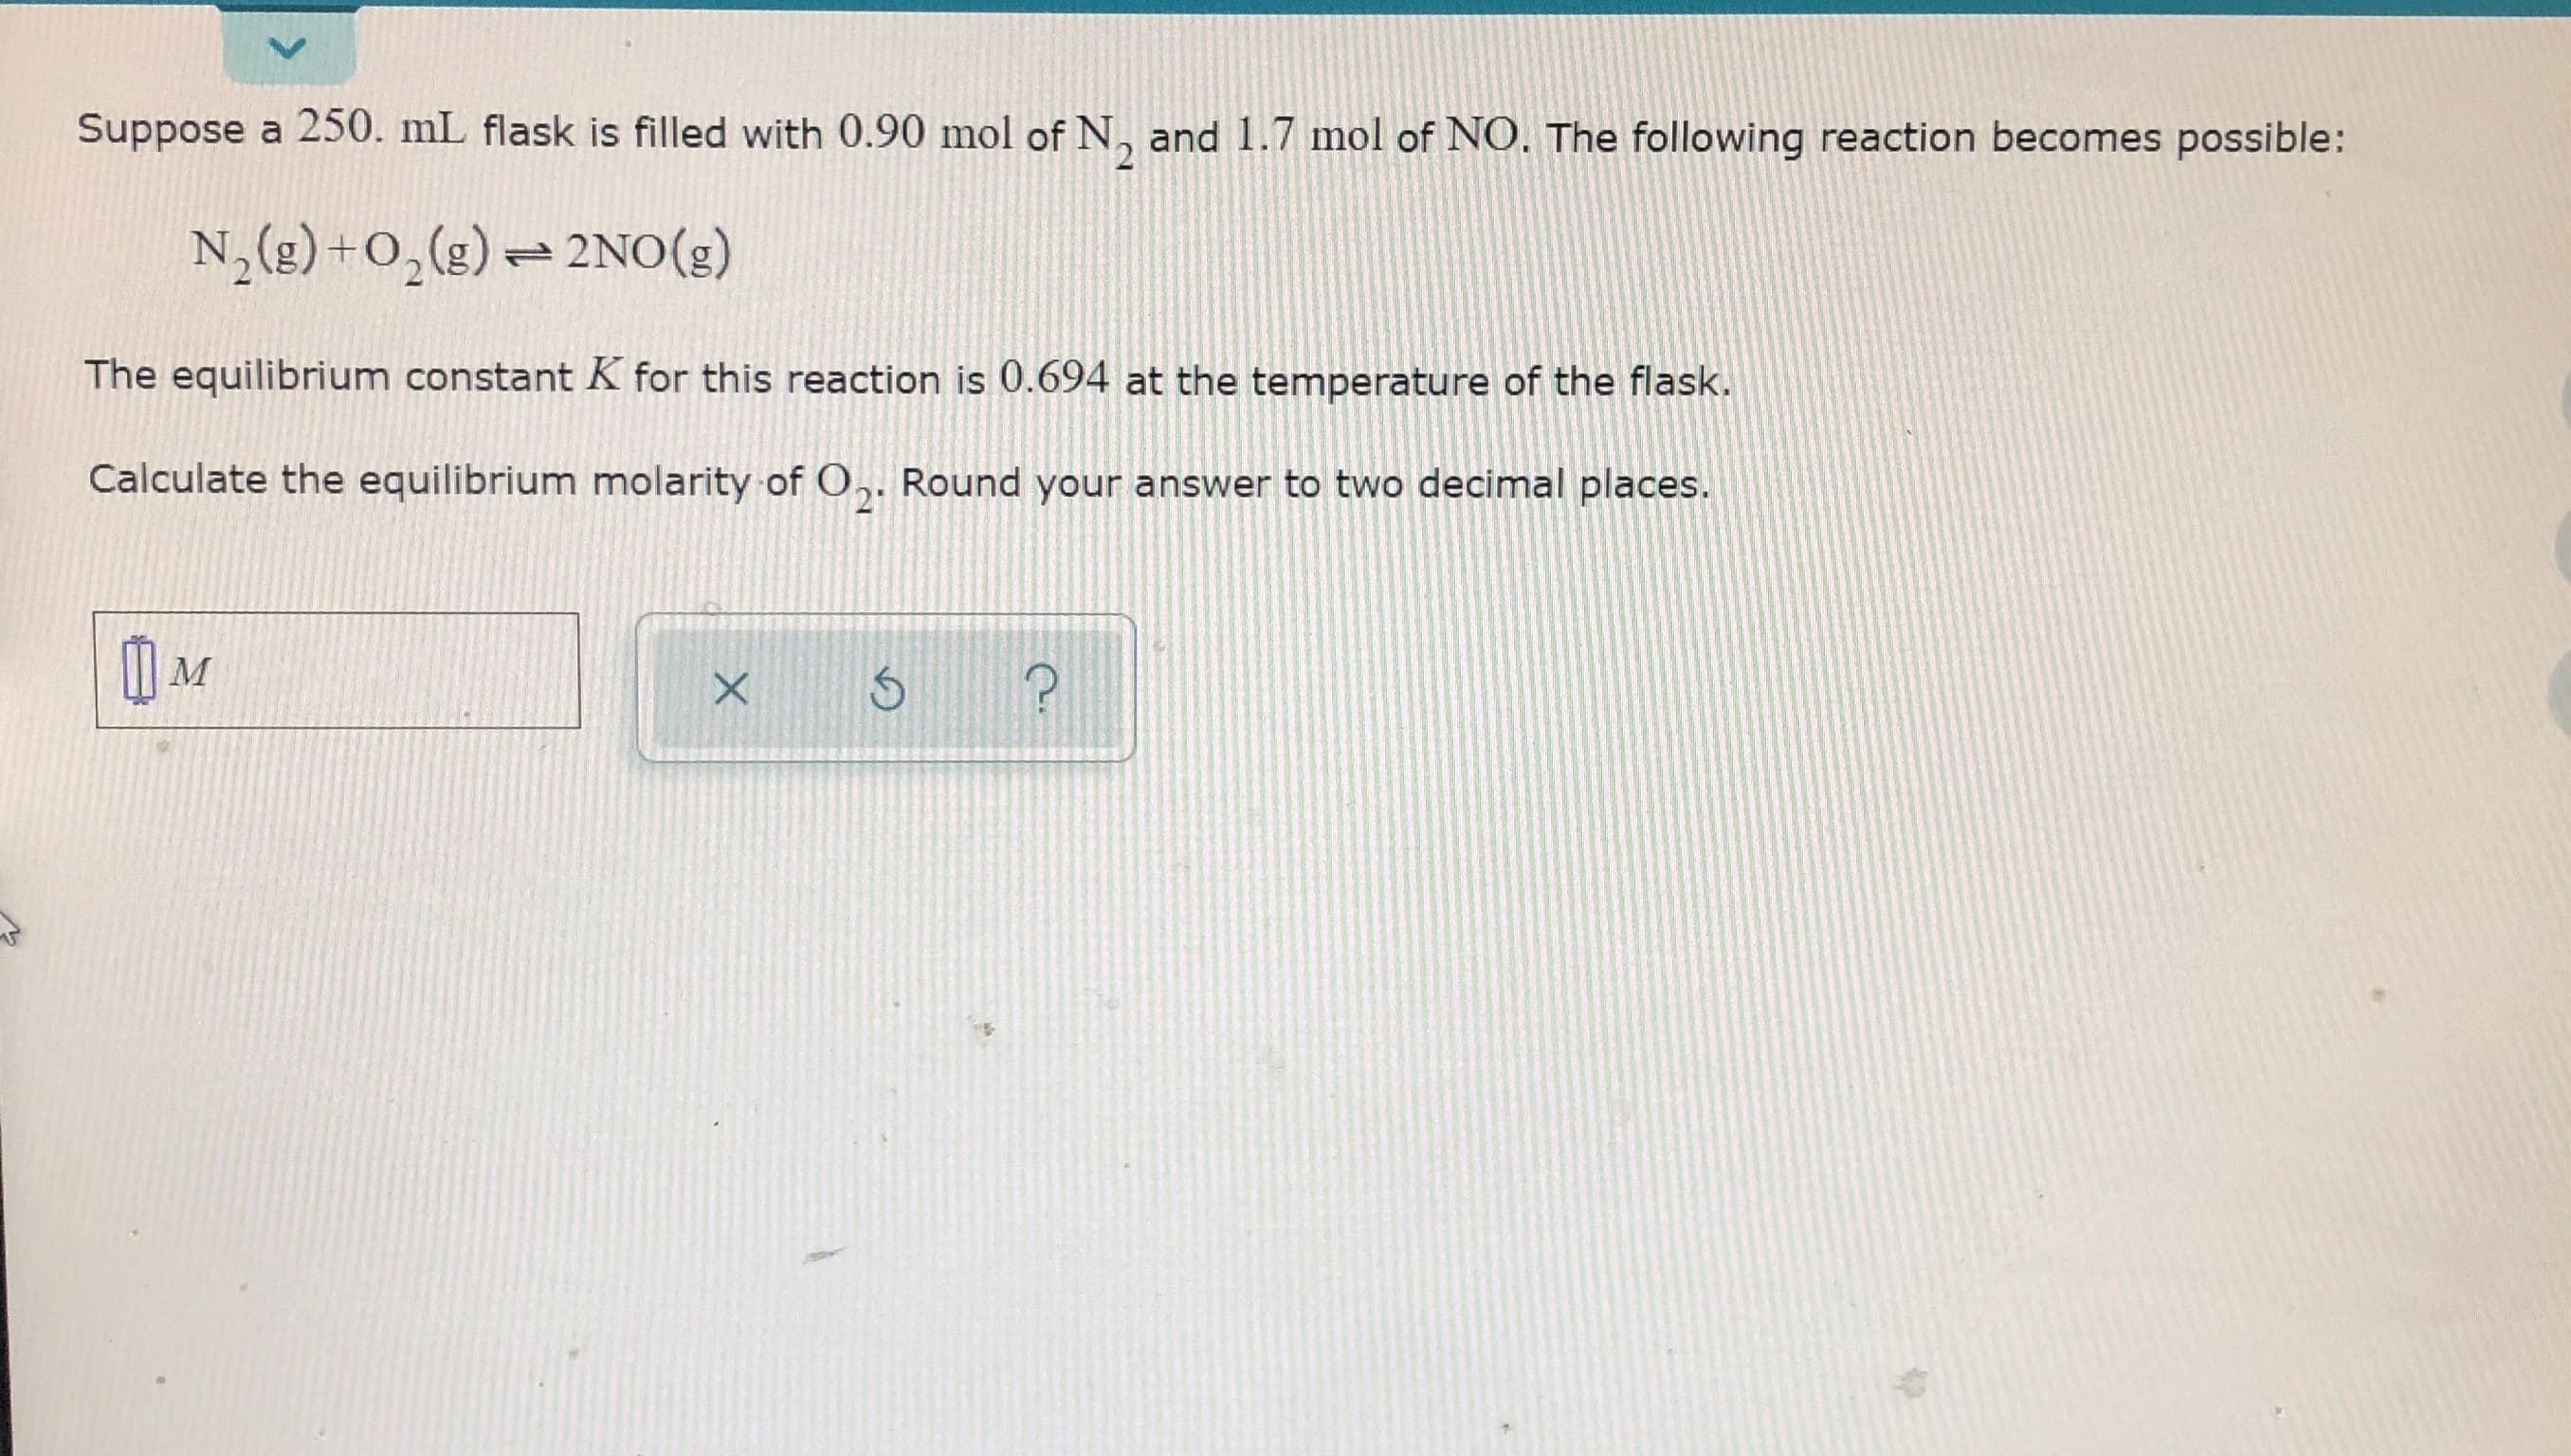 Suppose a 250. mL flask is filled with 0.90 mol of N, and 1.7 mol of NO. The following reaction becomes possible:
N,(g) +0,(g) = 2NO(g)
The equilibrium constant K for this reaction is 0.694 at the temperature of the flask.
Calculate the equilibrium molarity of 0,. Round your answer to two decimal places.
21
